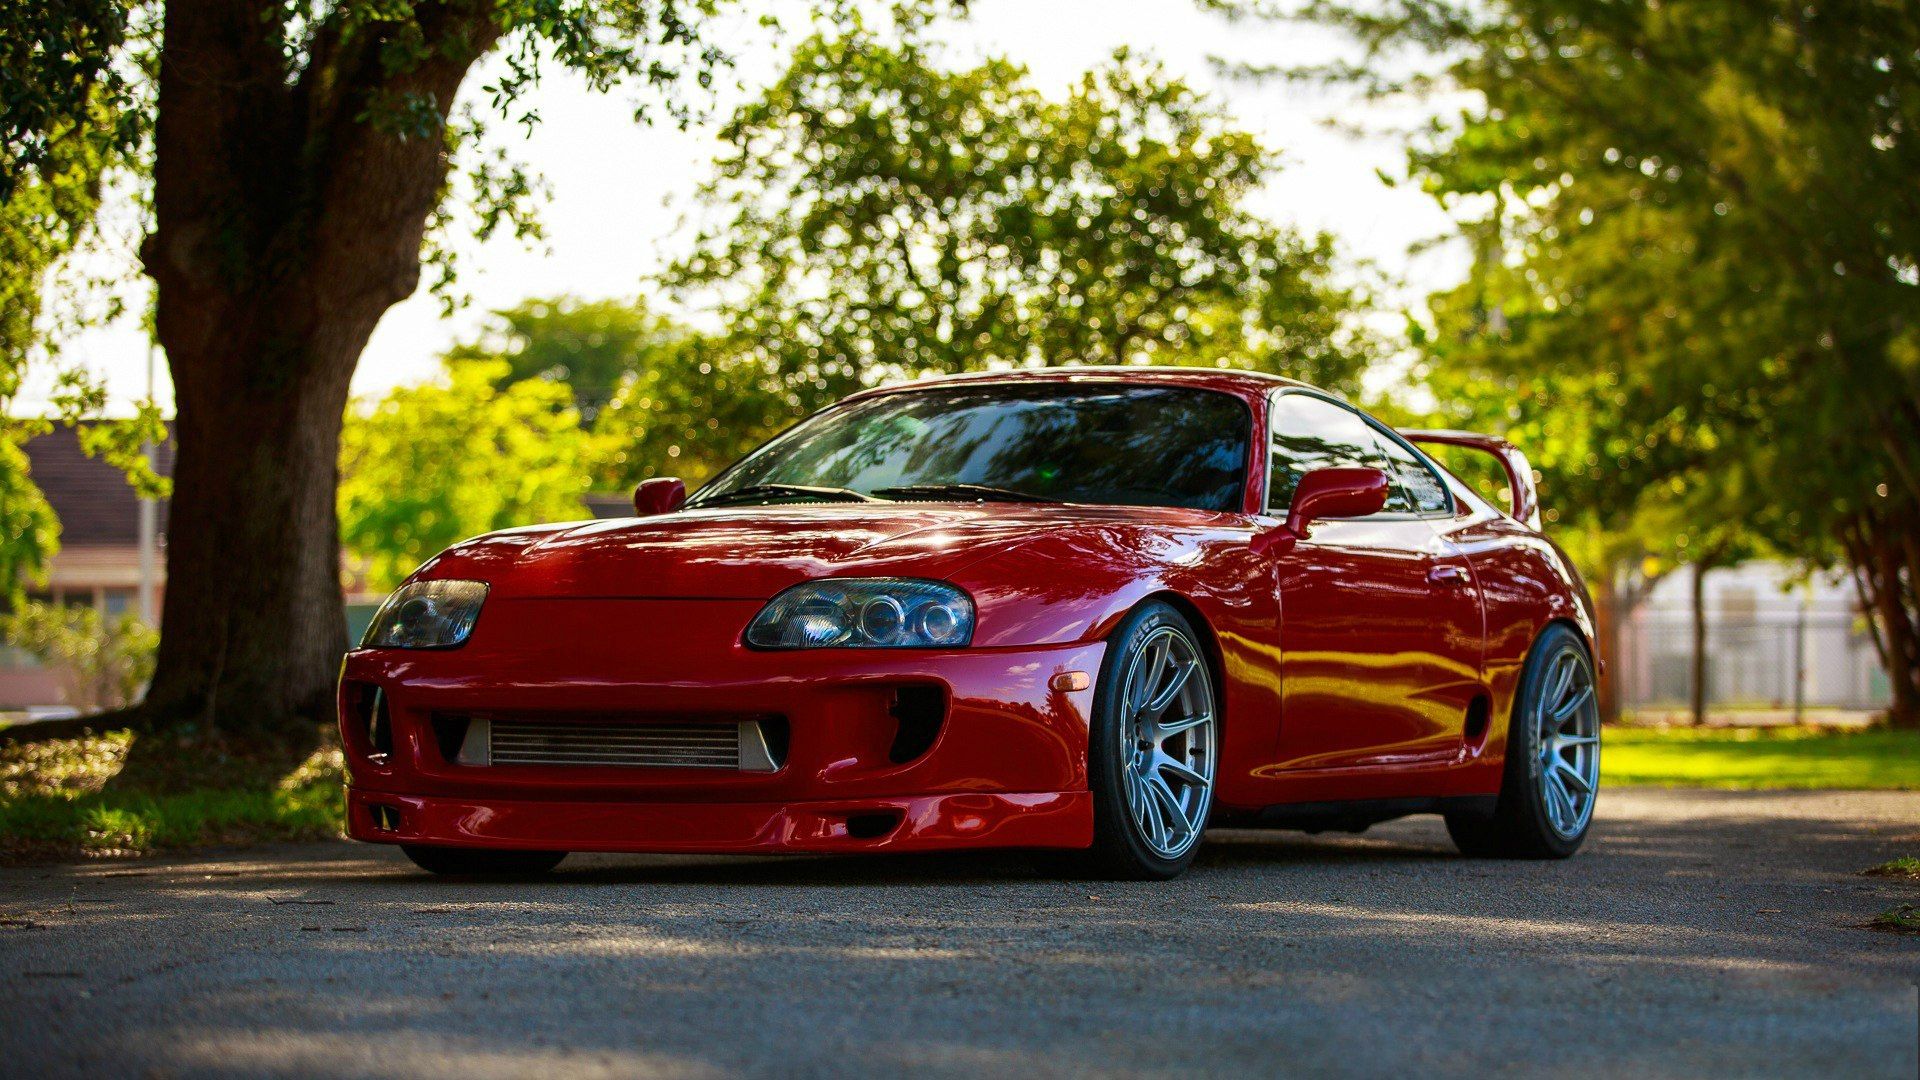 Free download Toyota Supra Buyers Guide Every Generation from the Mk1 to Mk5 [1200x600] for your Desktop, Mobile & Tablet. Explore Mark 4 Supra Wallpaper. Supra Wallpaper, Supra Shoes